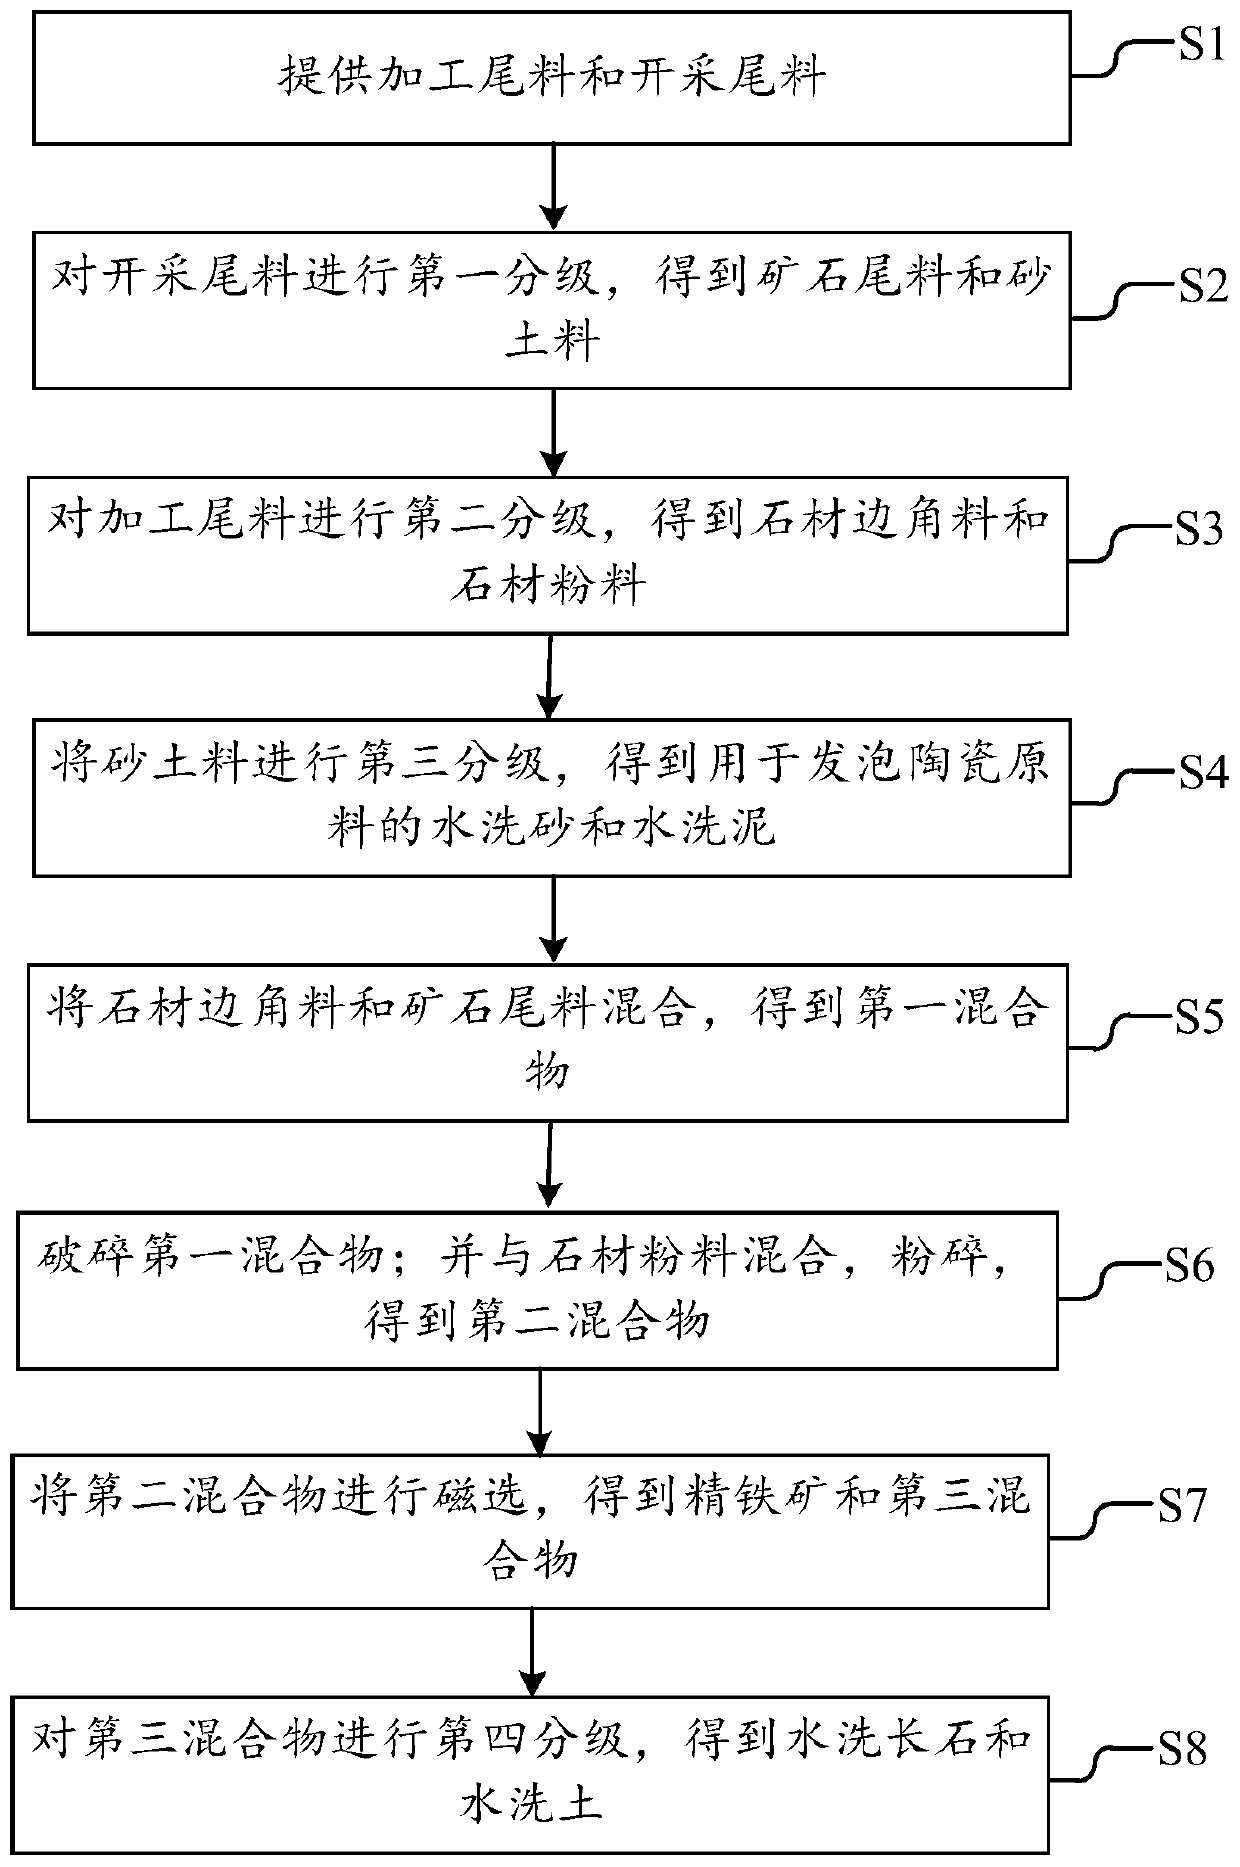 Comprehensive utilization method of Luoyuan red tailings